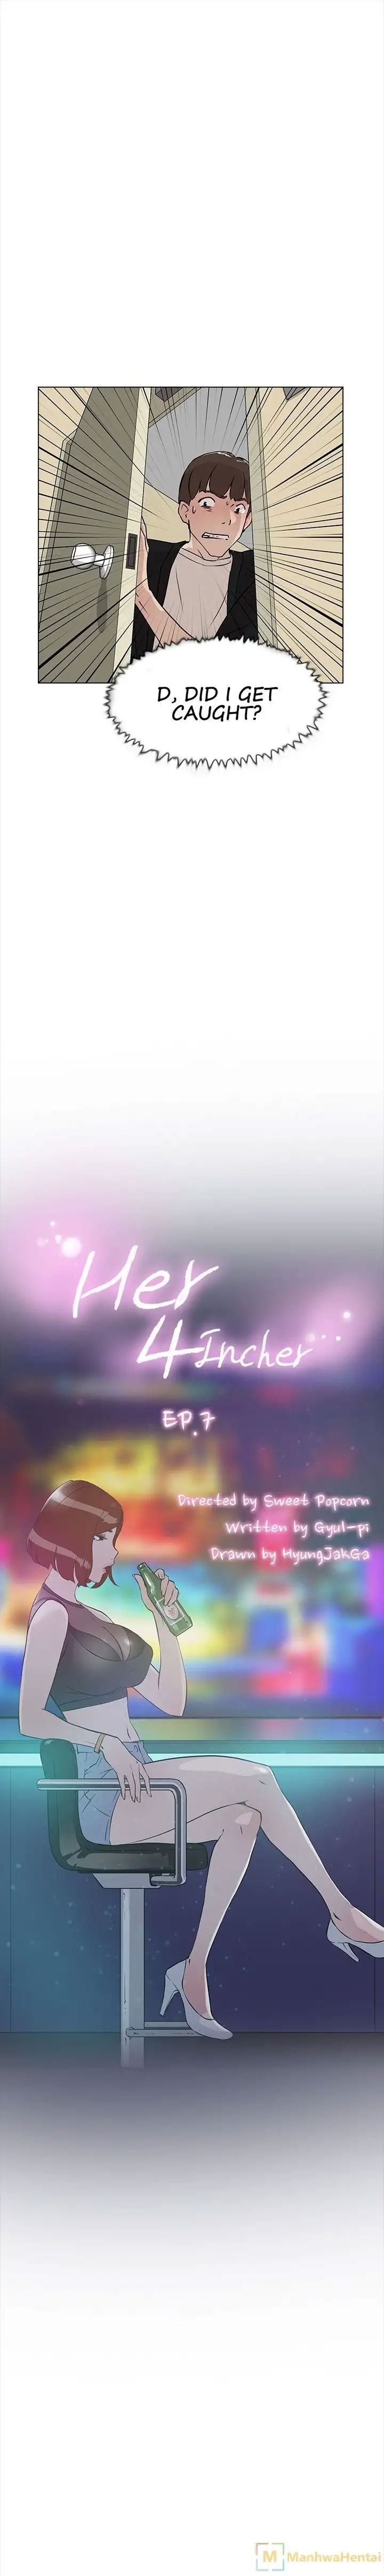 her-4-incher-chap-7-0